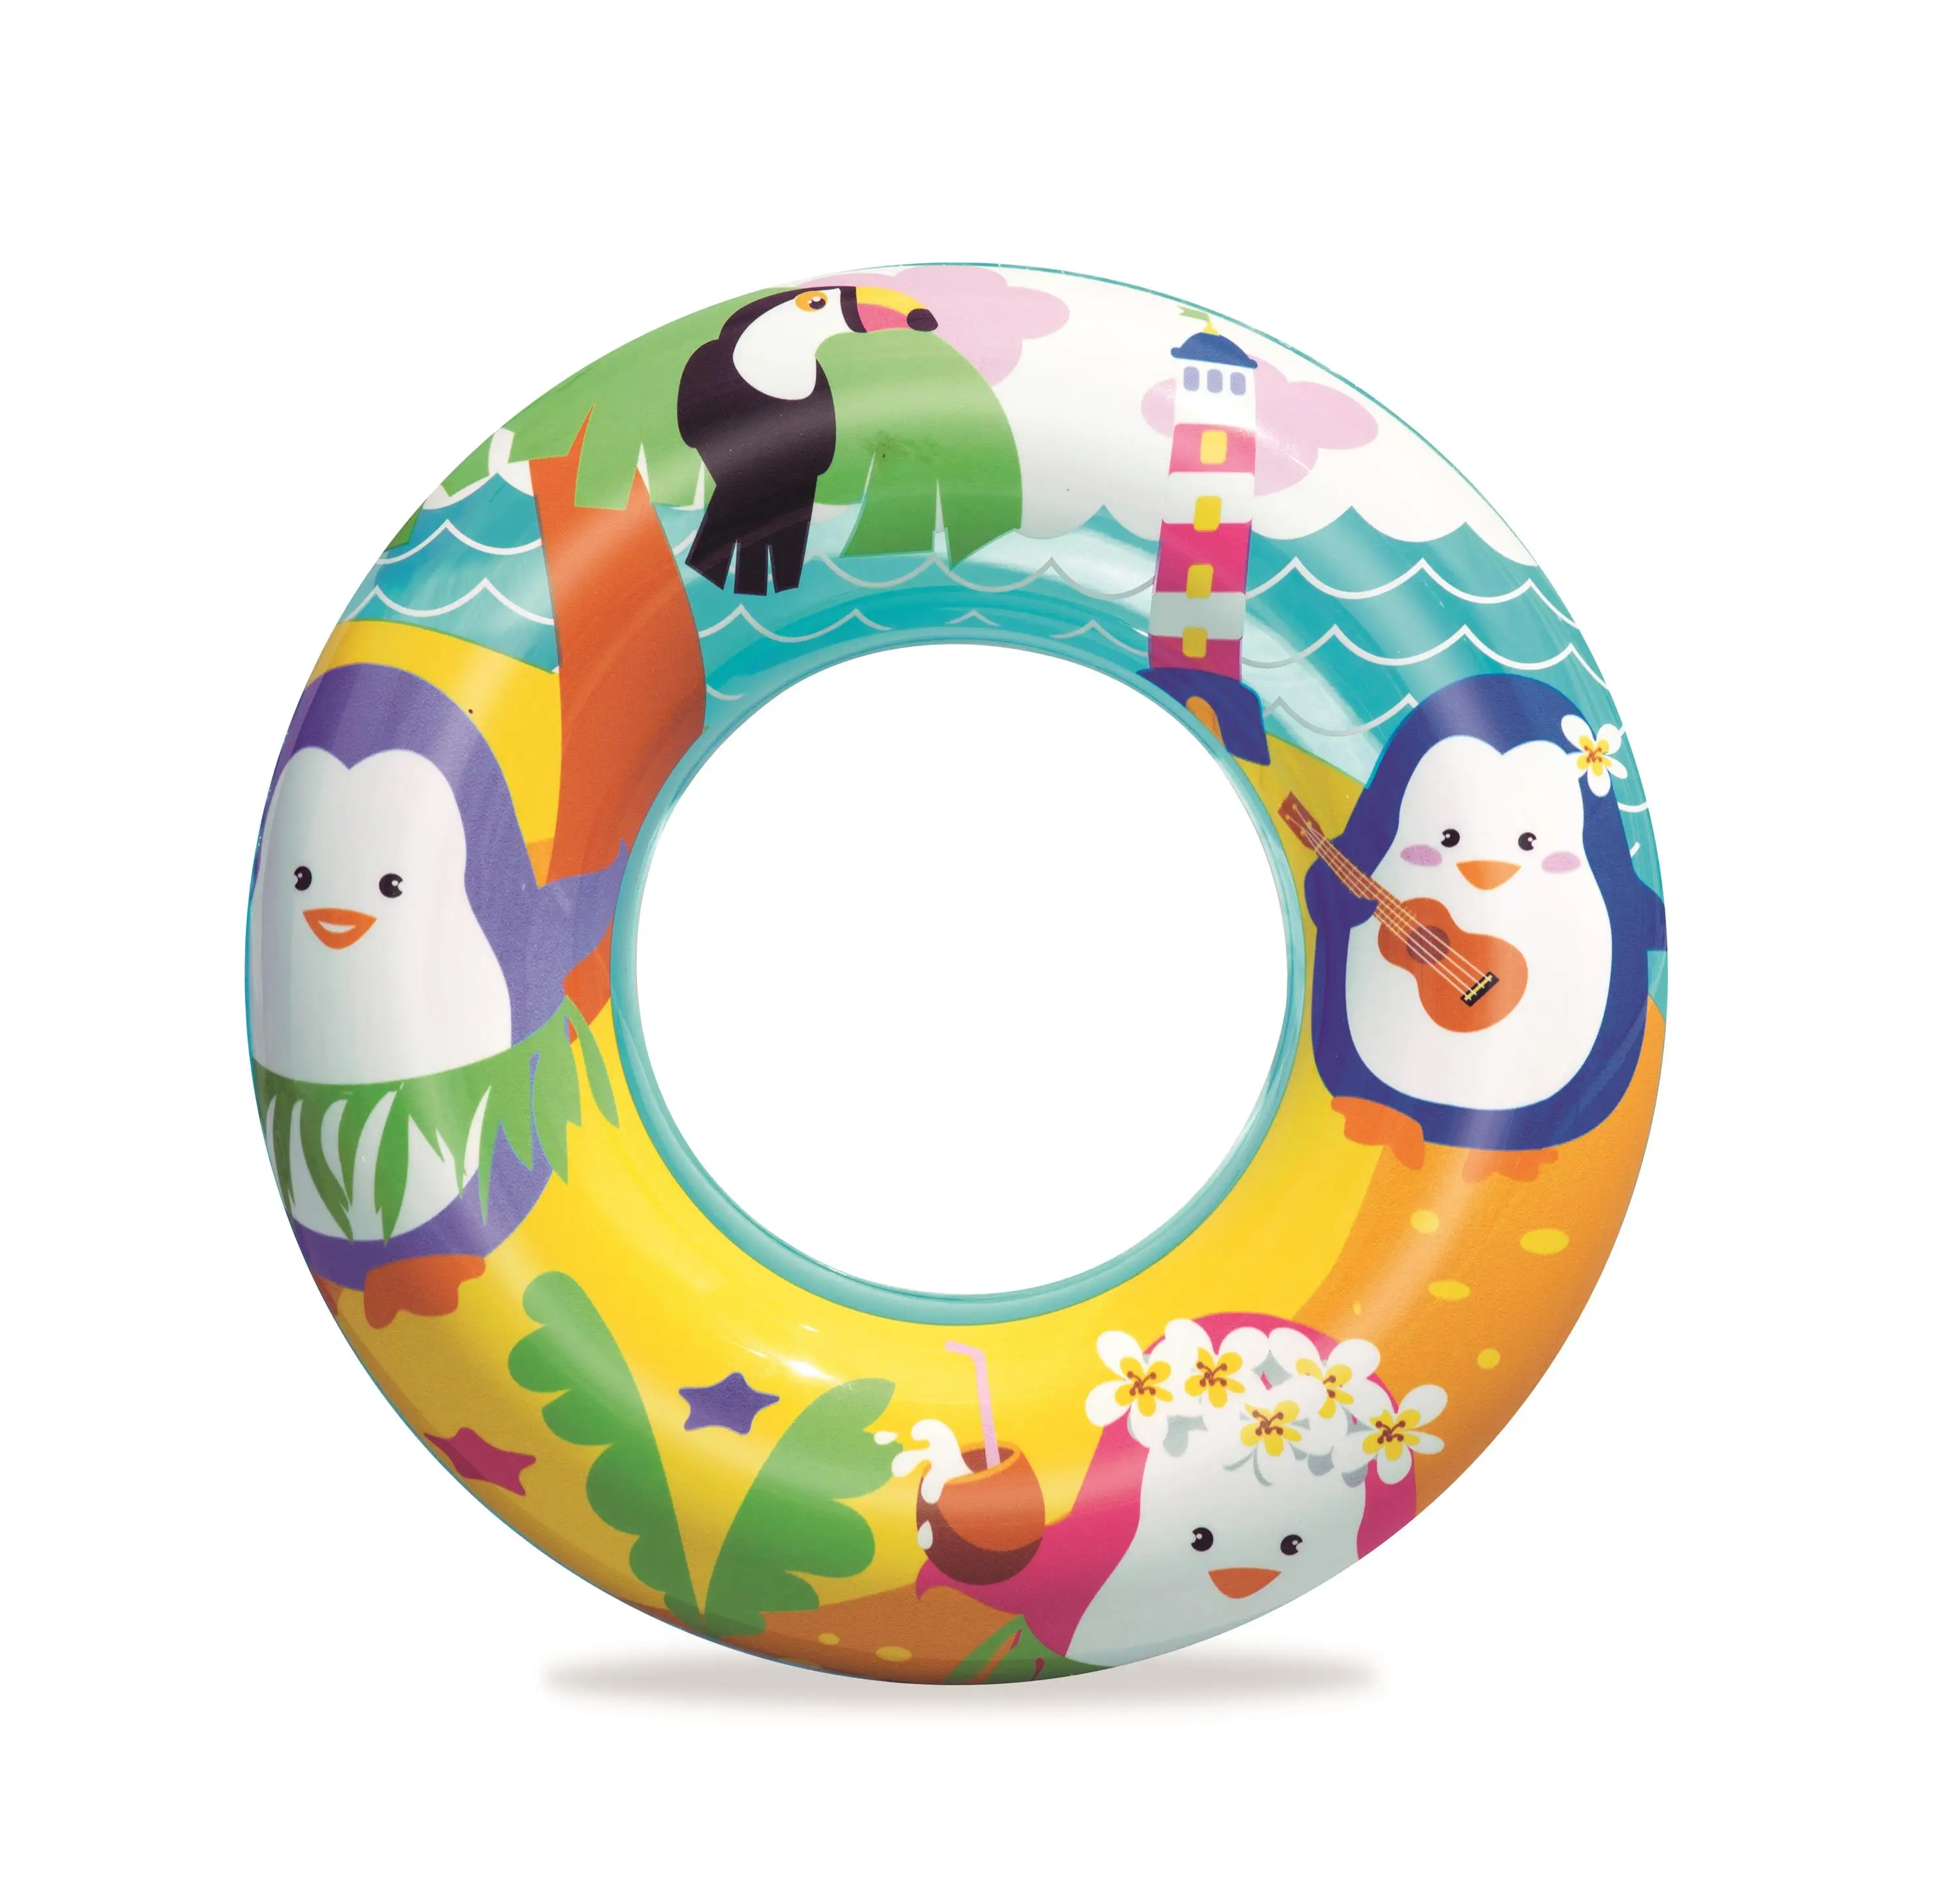 

Bestway 36113 sea adventures 51cm kids swim ring inflatable rubber ring tube for kids 3-6 years, As picture